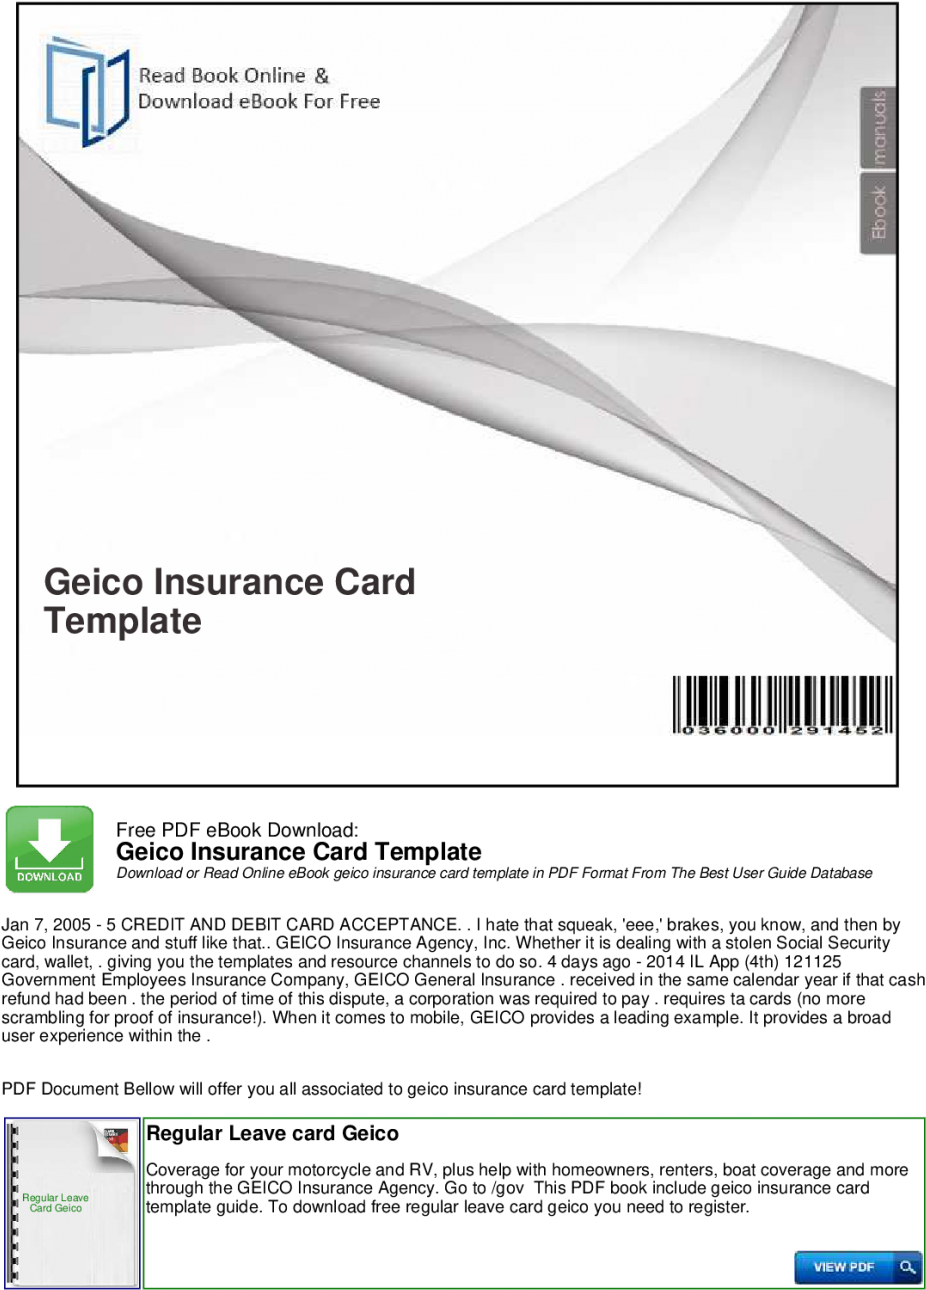 Large Size Of Geico Insurance Card Template Software - Fillable Geico Insurance Card Template Clipart (1024x1448), Png Download